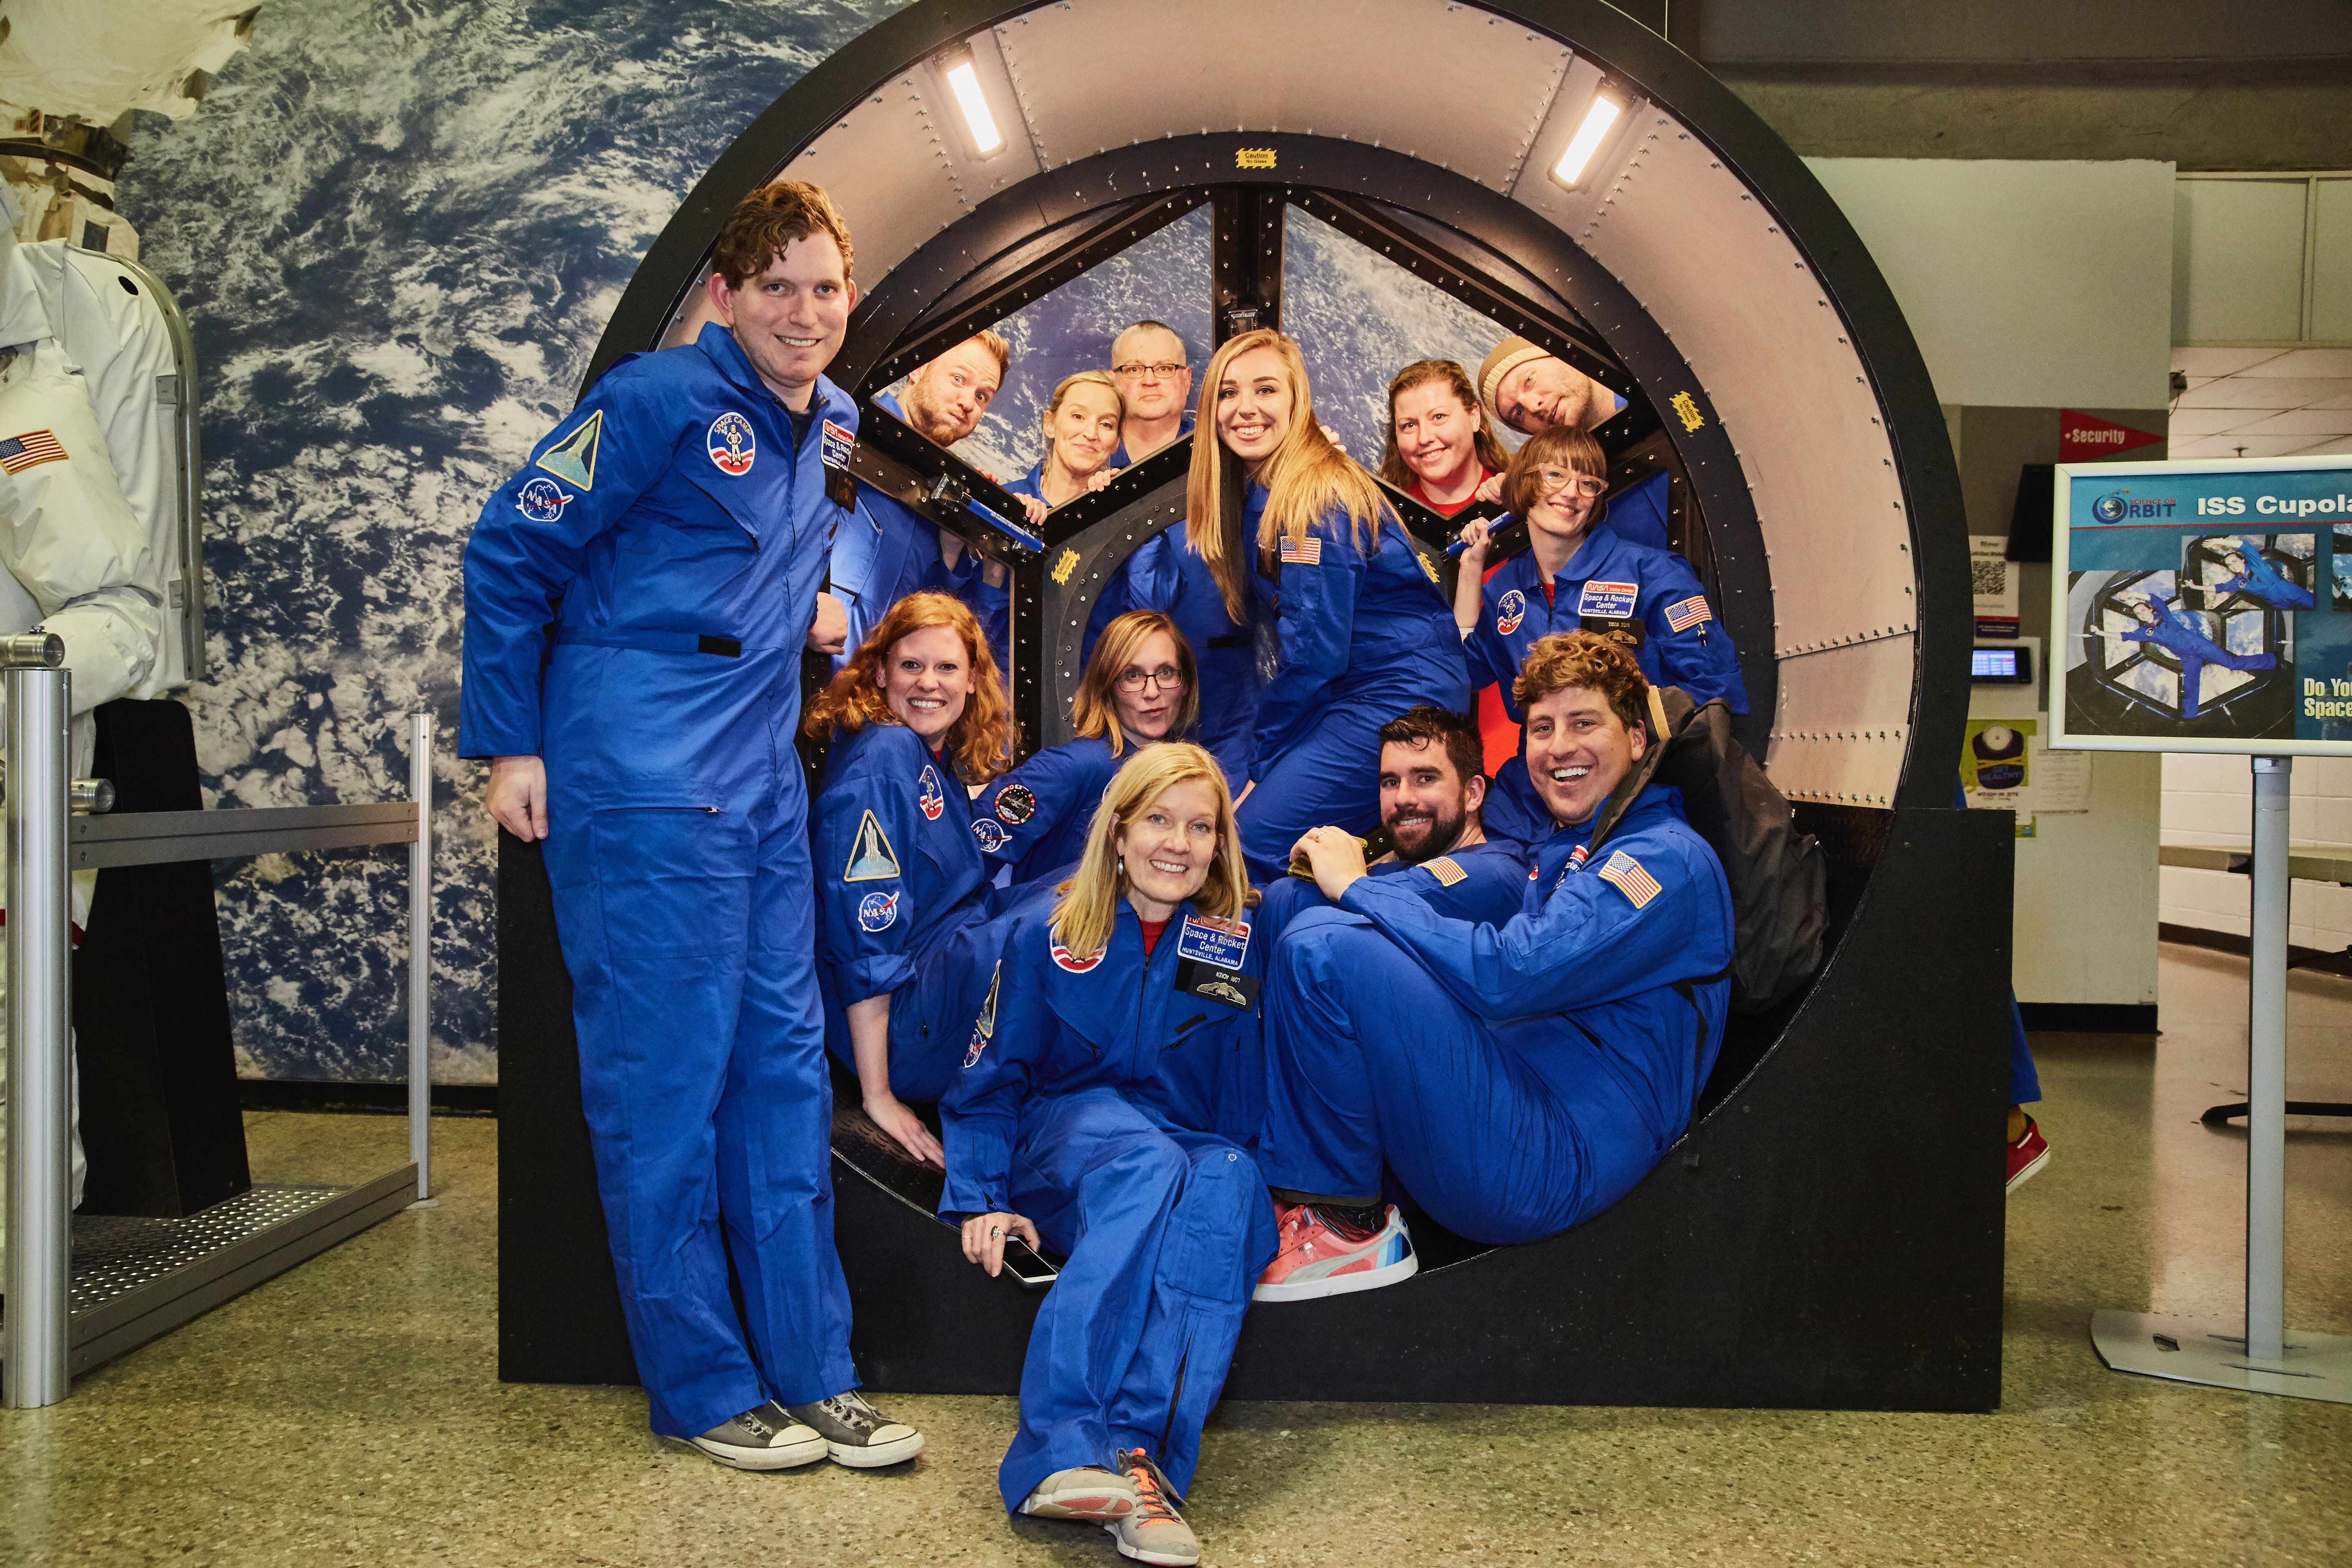 This One Time, at Space Camp InsideHook